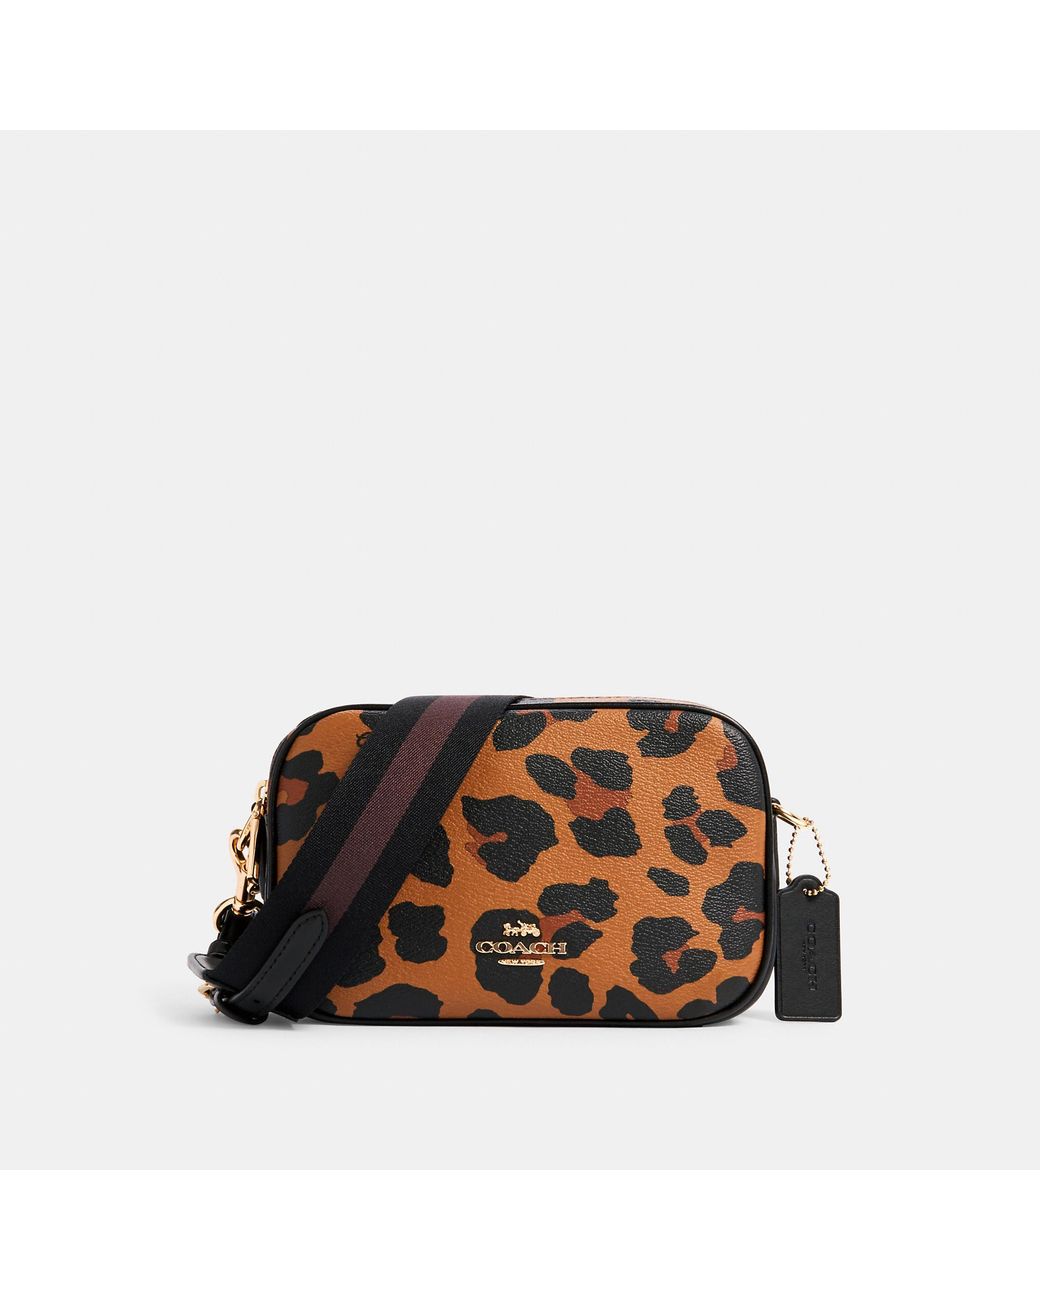 Terry shoulder bag from Coach - مون اوتليت Moon Outlet - شنط ماركات اصلية